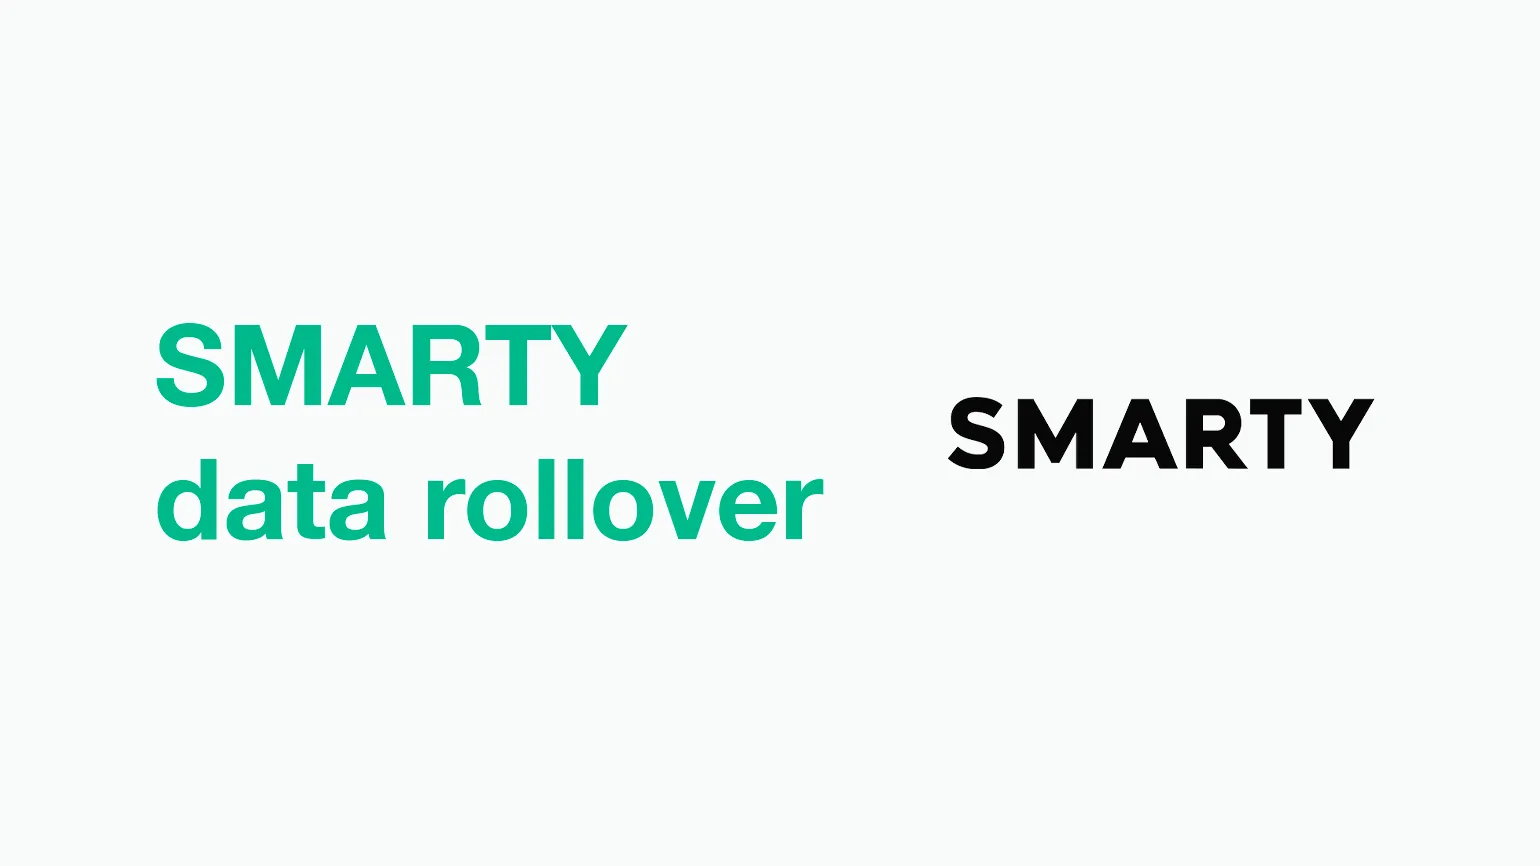 SMARTY data rollover